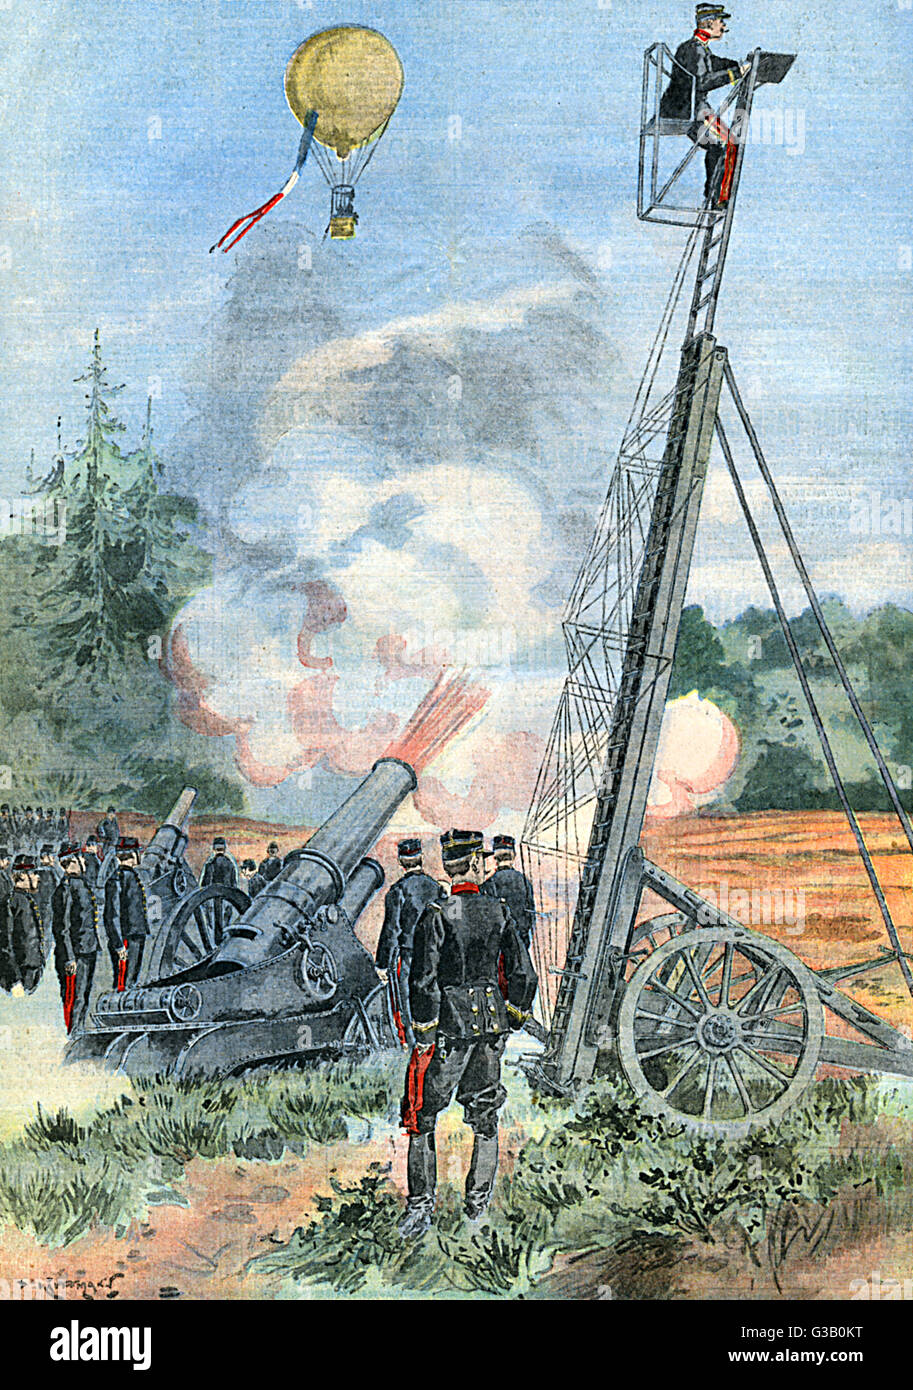 The French army, on the look- out for artillery attacks.         Date: 1906 Stock Photo